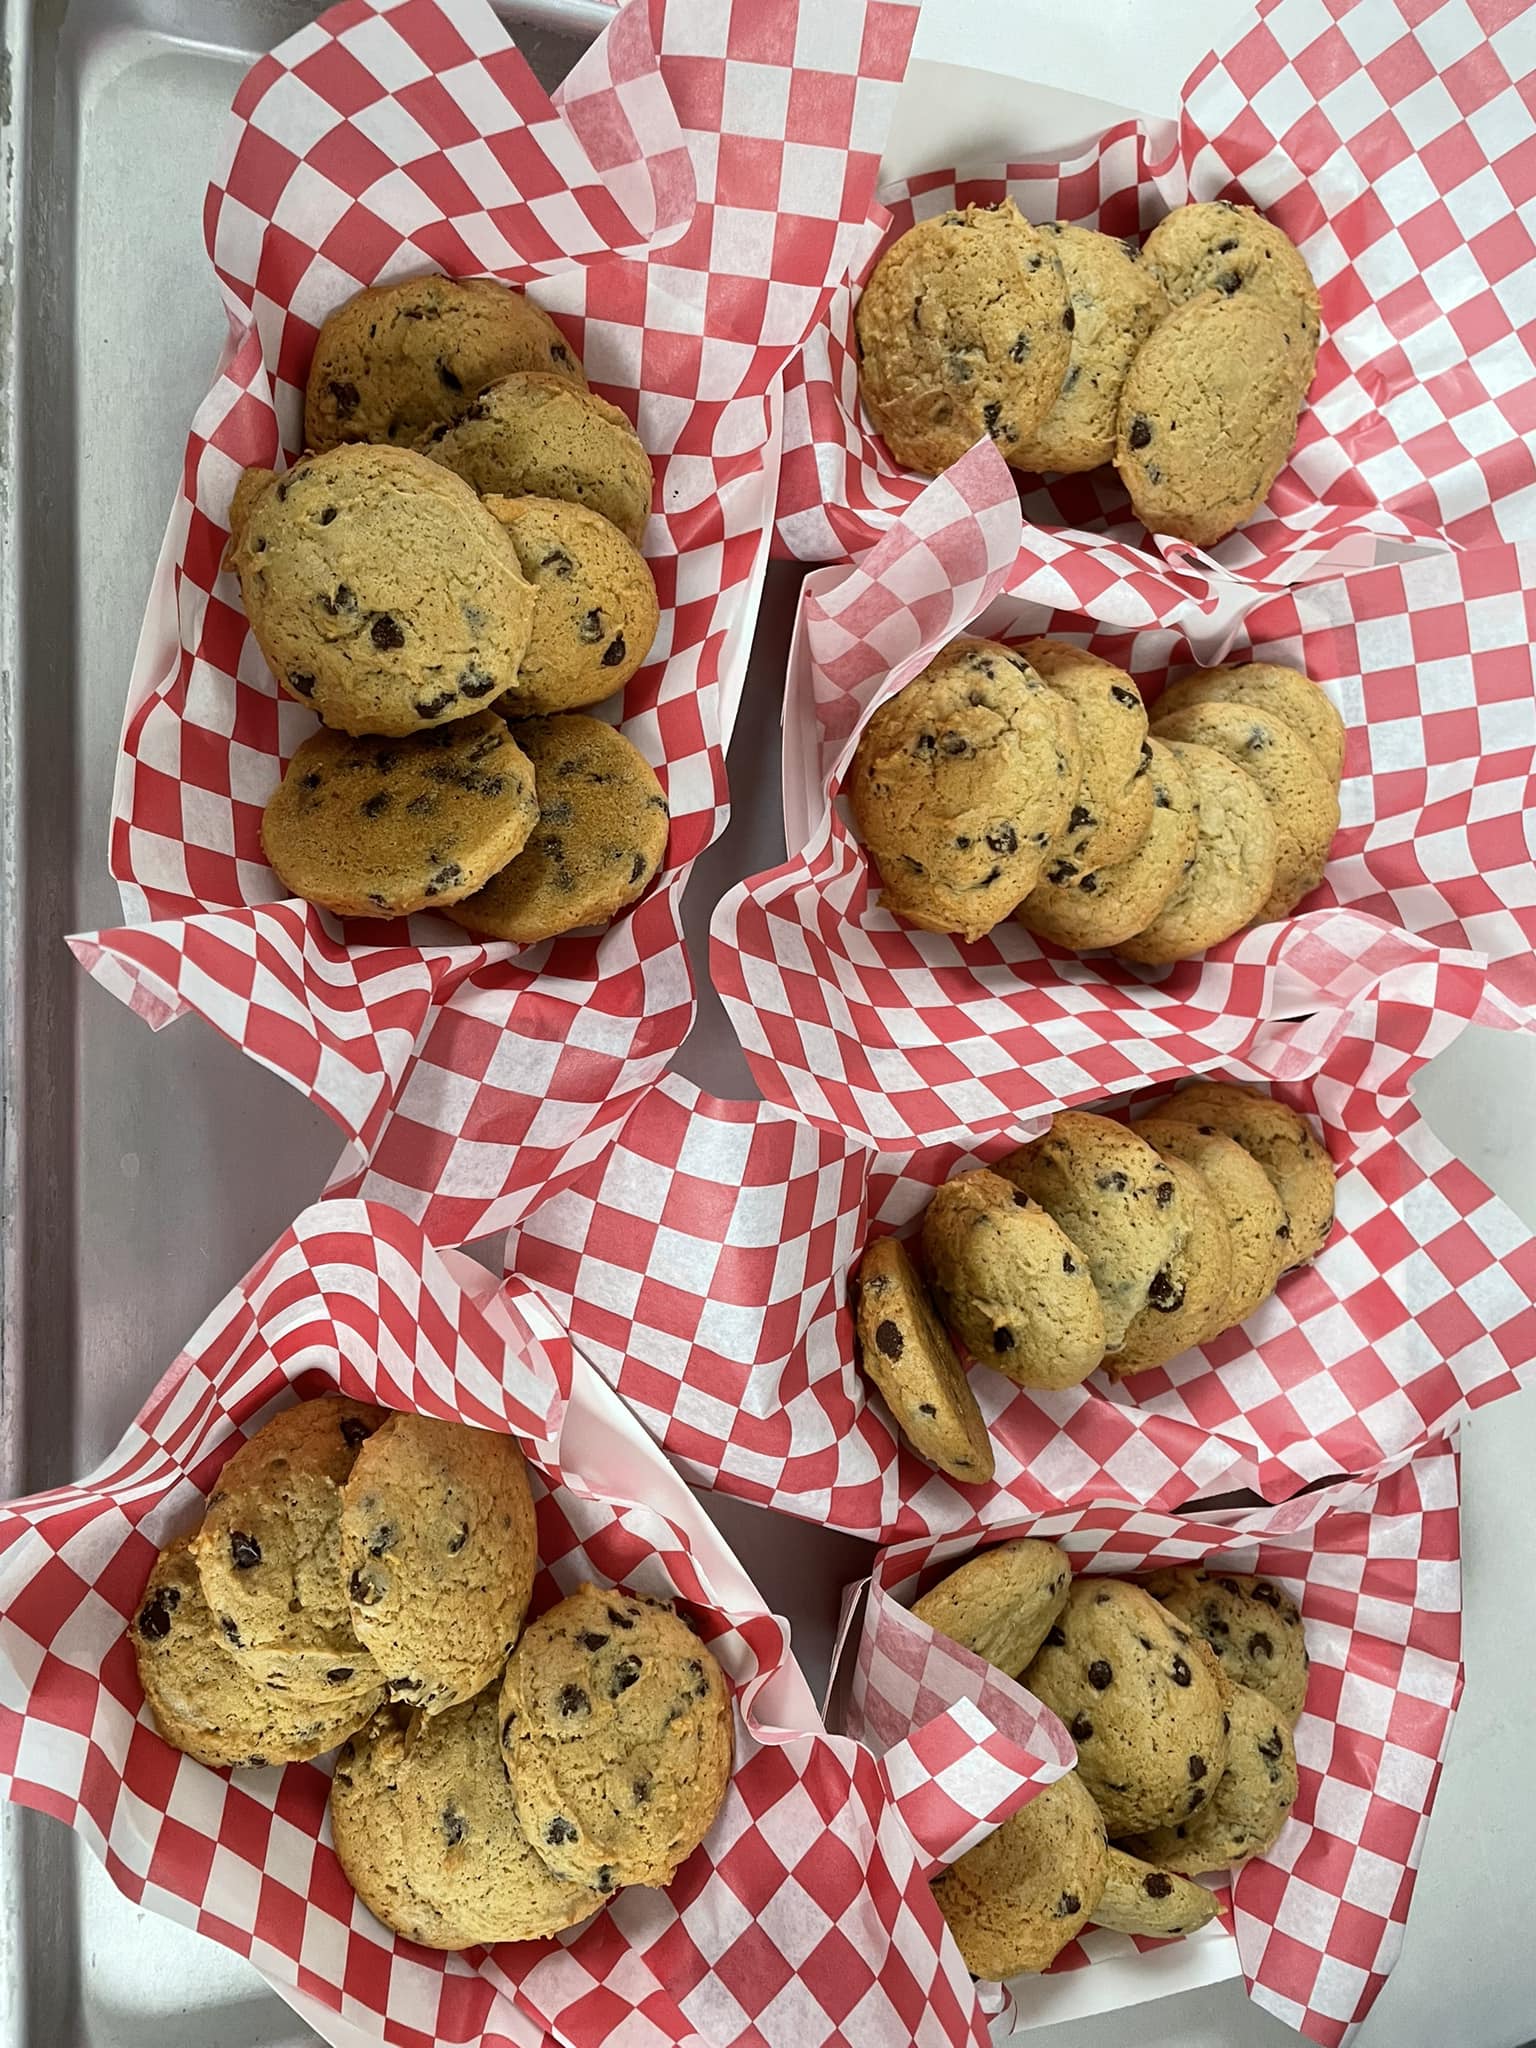 Chocolate chip cookies on a tray.